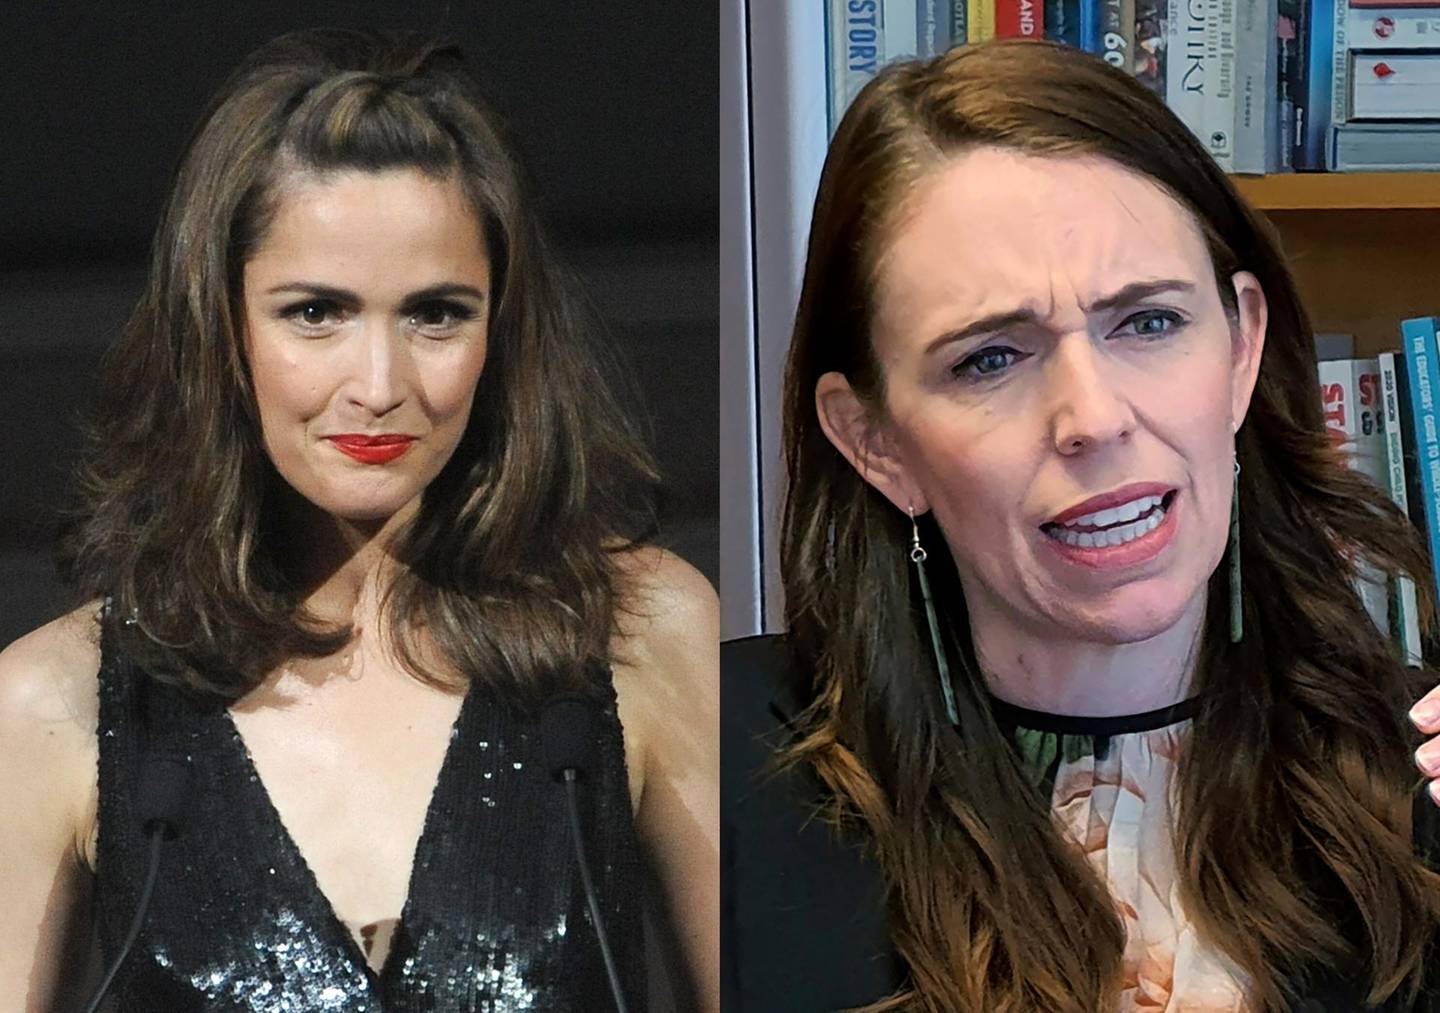 Rose Byrne, left, is set to portray New Zealand Prime Minister in 'They Are Us', a film about the response to the Christchurch mosque attacks. Reuters